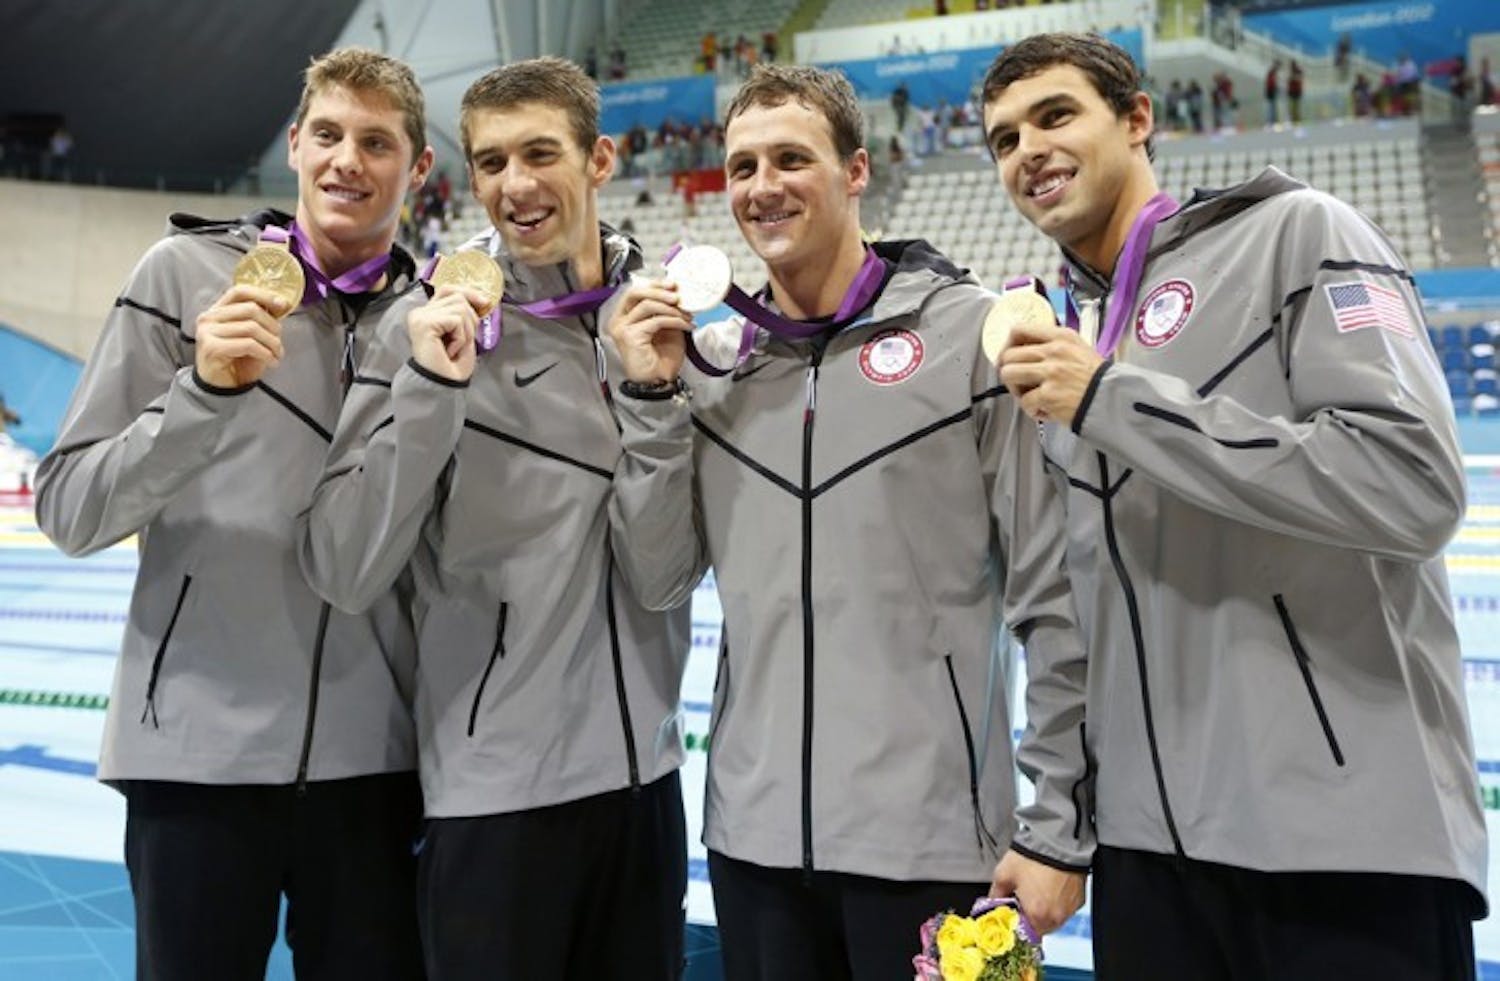 Former Gators Conor Dwyer (left) and Ryan Lochte (third from left) show off their gold medals after winning the 4x200-meter freestyle relay with a time of 6:59.70 at the 2012 London Olympics.&nbsp;